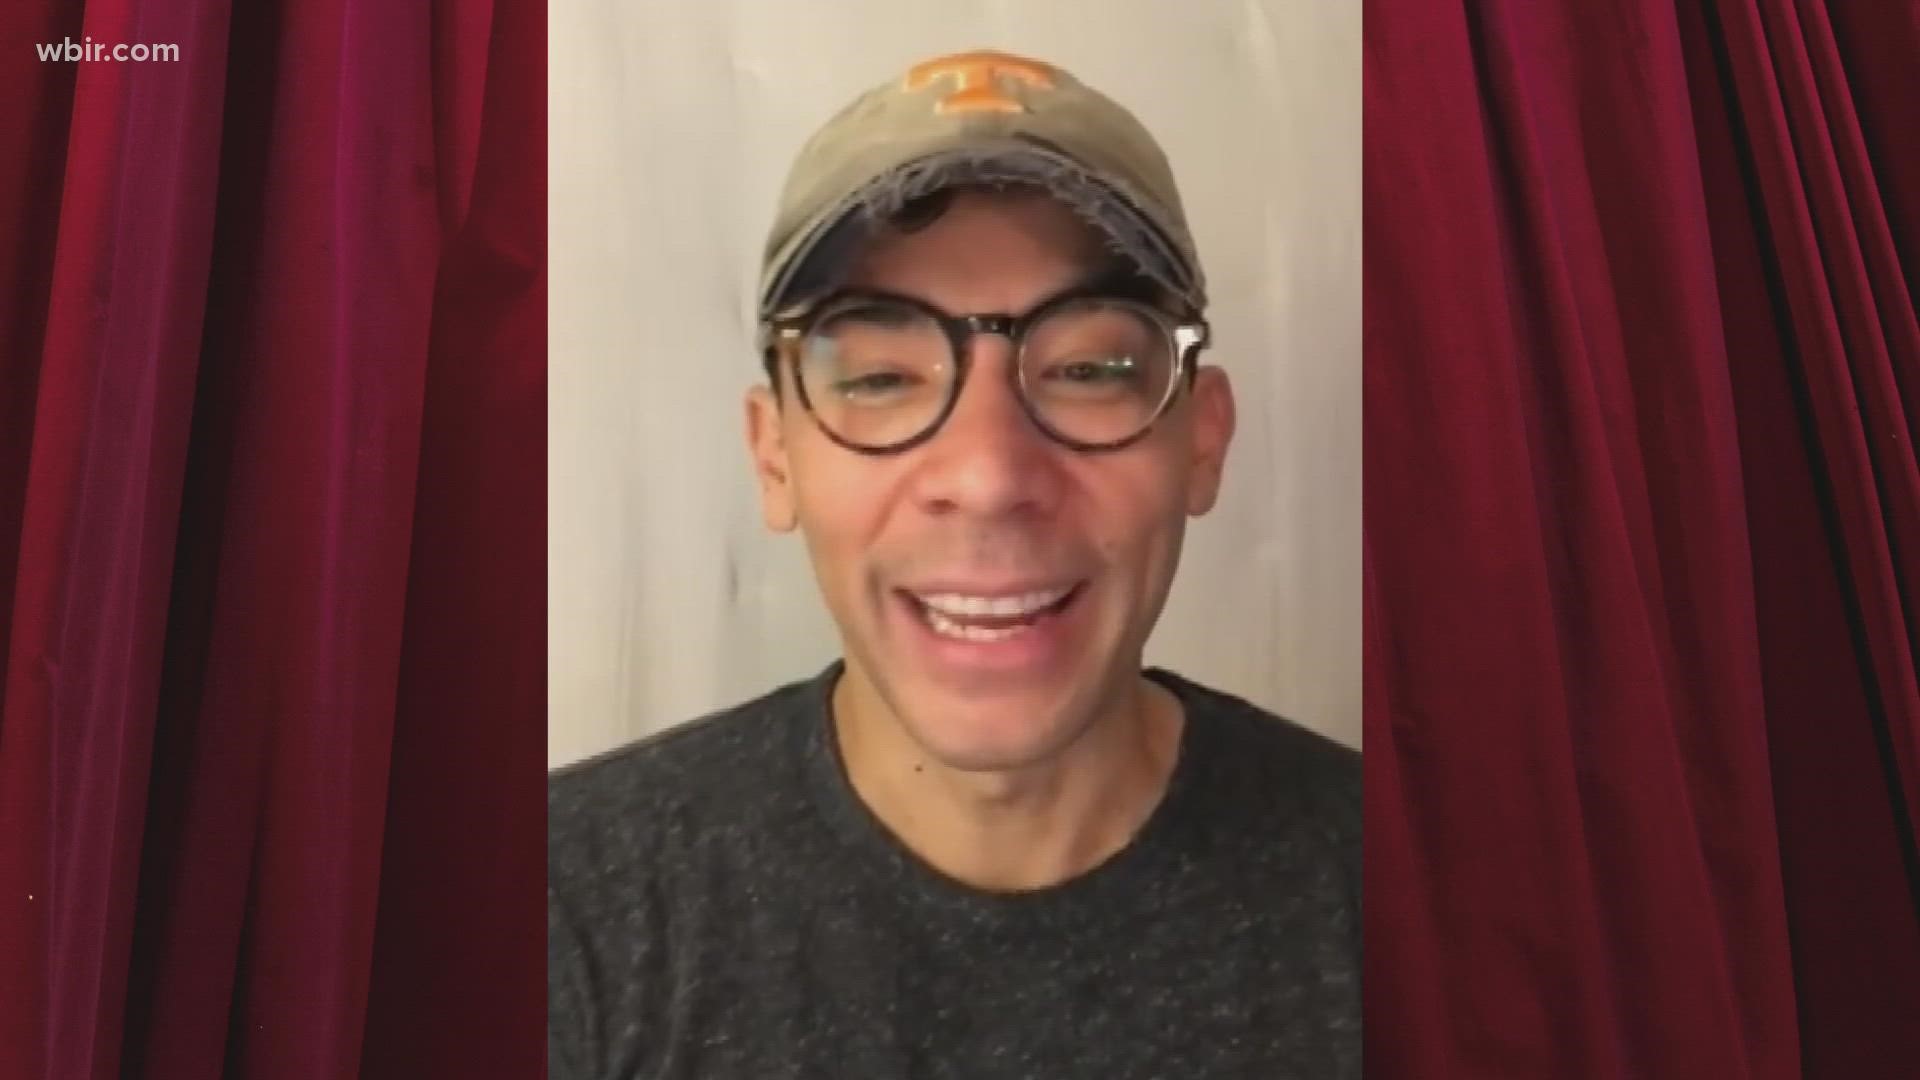 Conrad Ricamora says his time getting his M.F.A through UT's Department of Theatre made all the difference for his now Grammy-nominated career onstage and on screen.